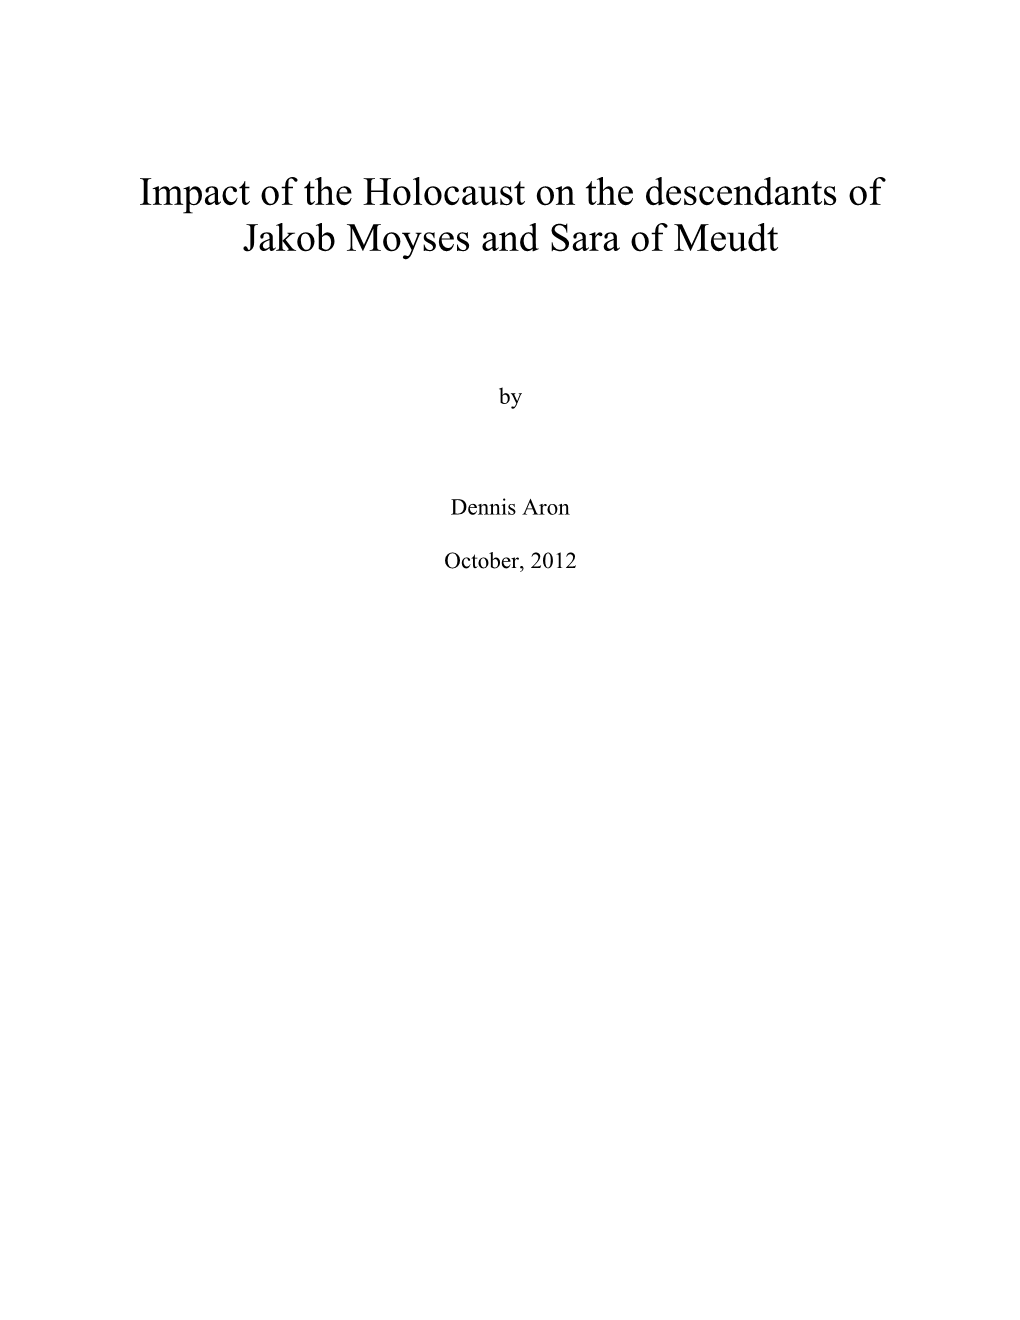 Impact of the Holocaust on the Descendants of Jakob Moyses and Sara of Meudt